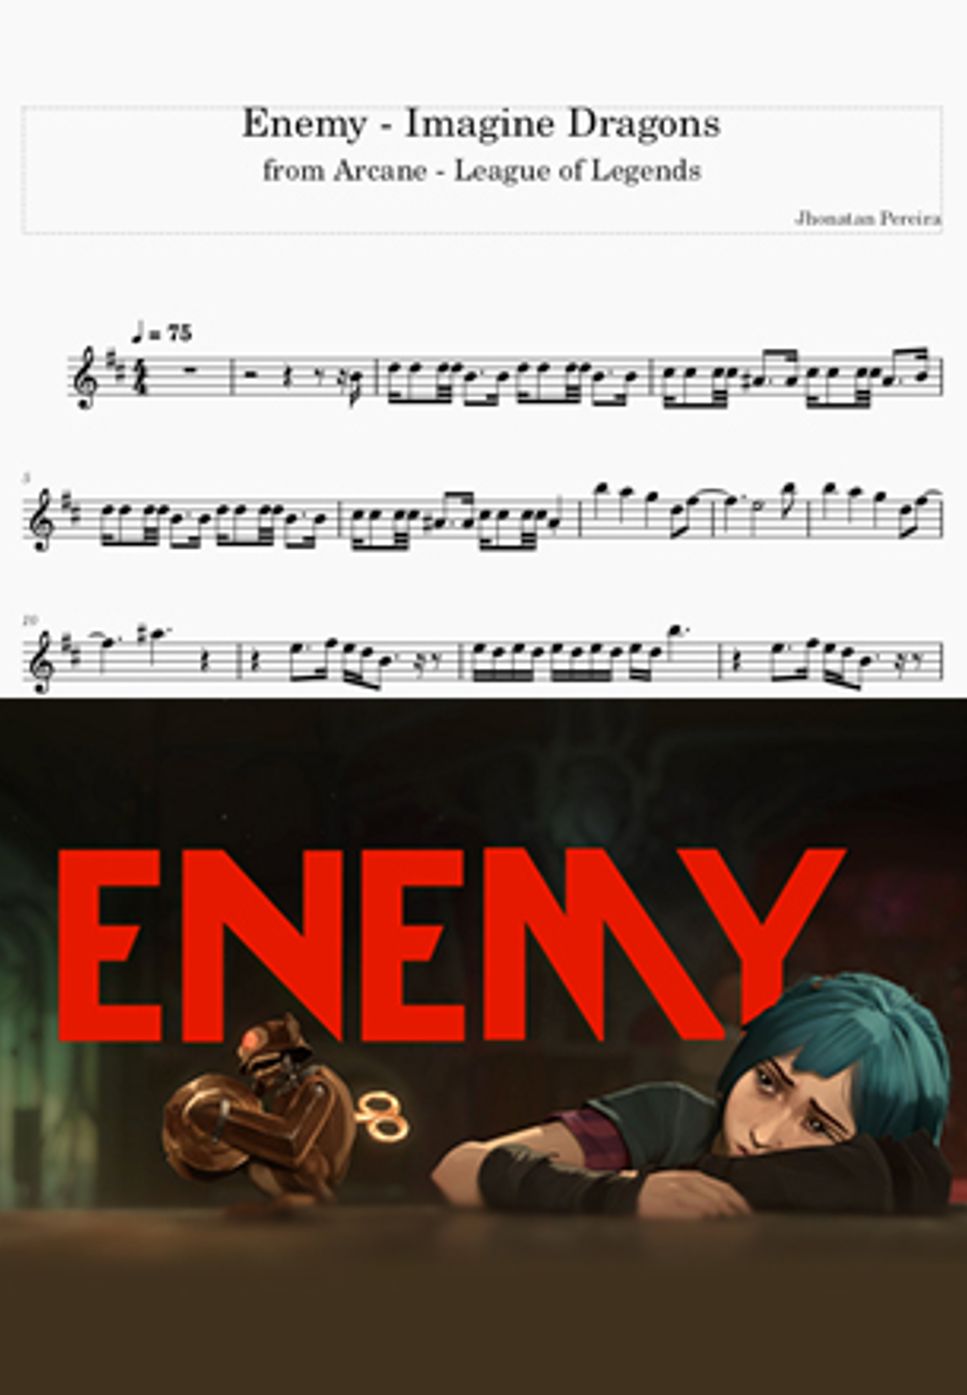 Imagine Dragons - Enemy: from Arcane - League of Legends by Jhonatan Pereira